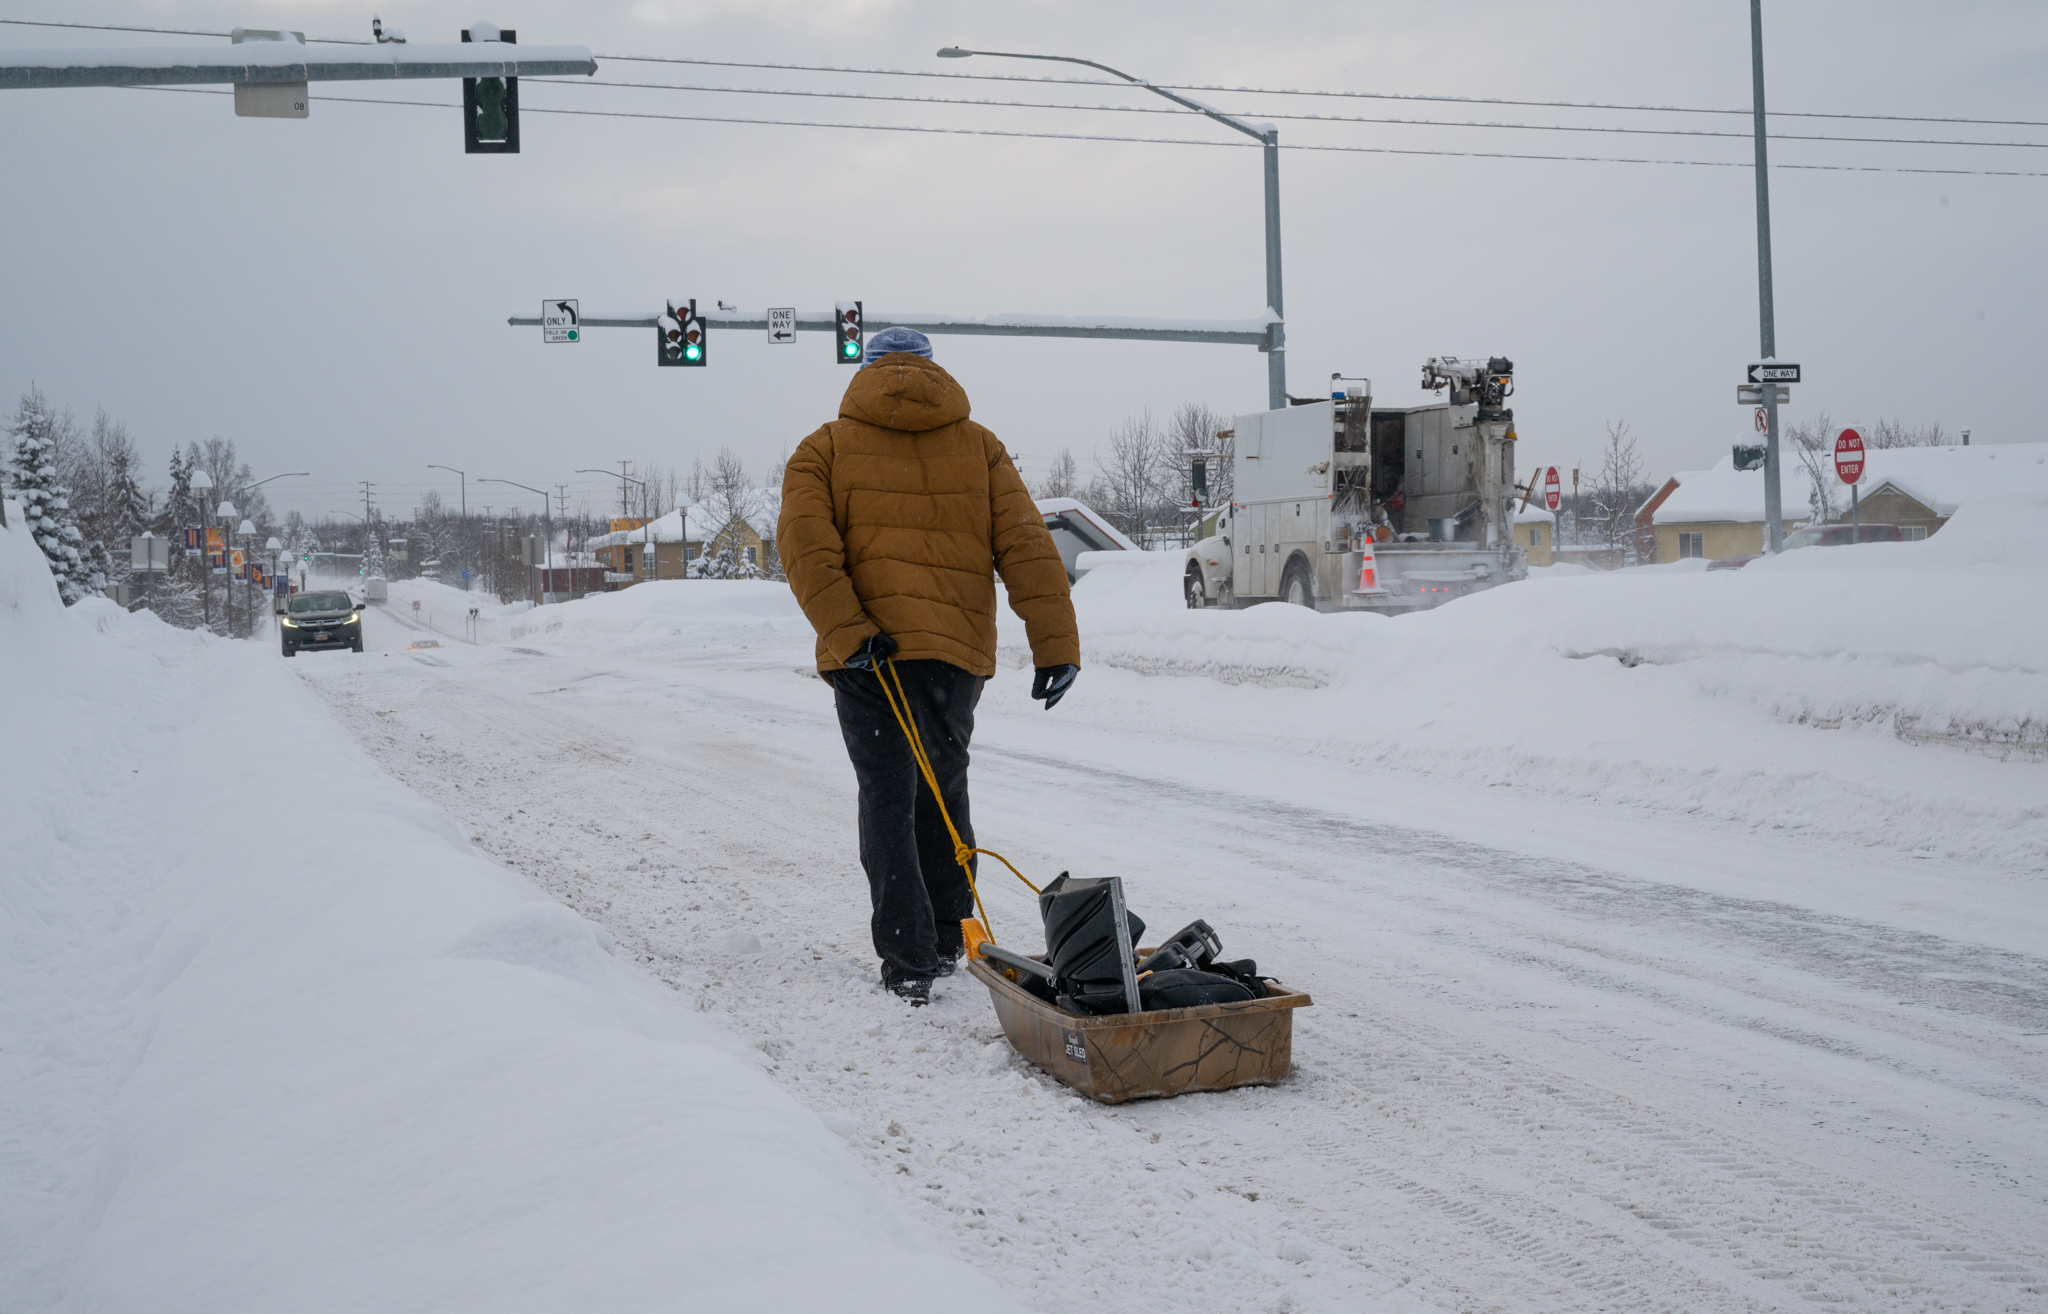 A man carries a sled full of shovels in winter.